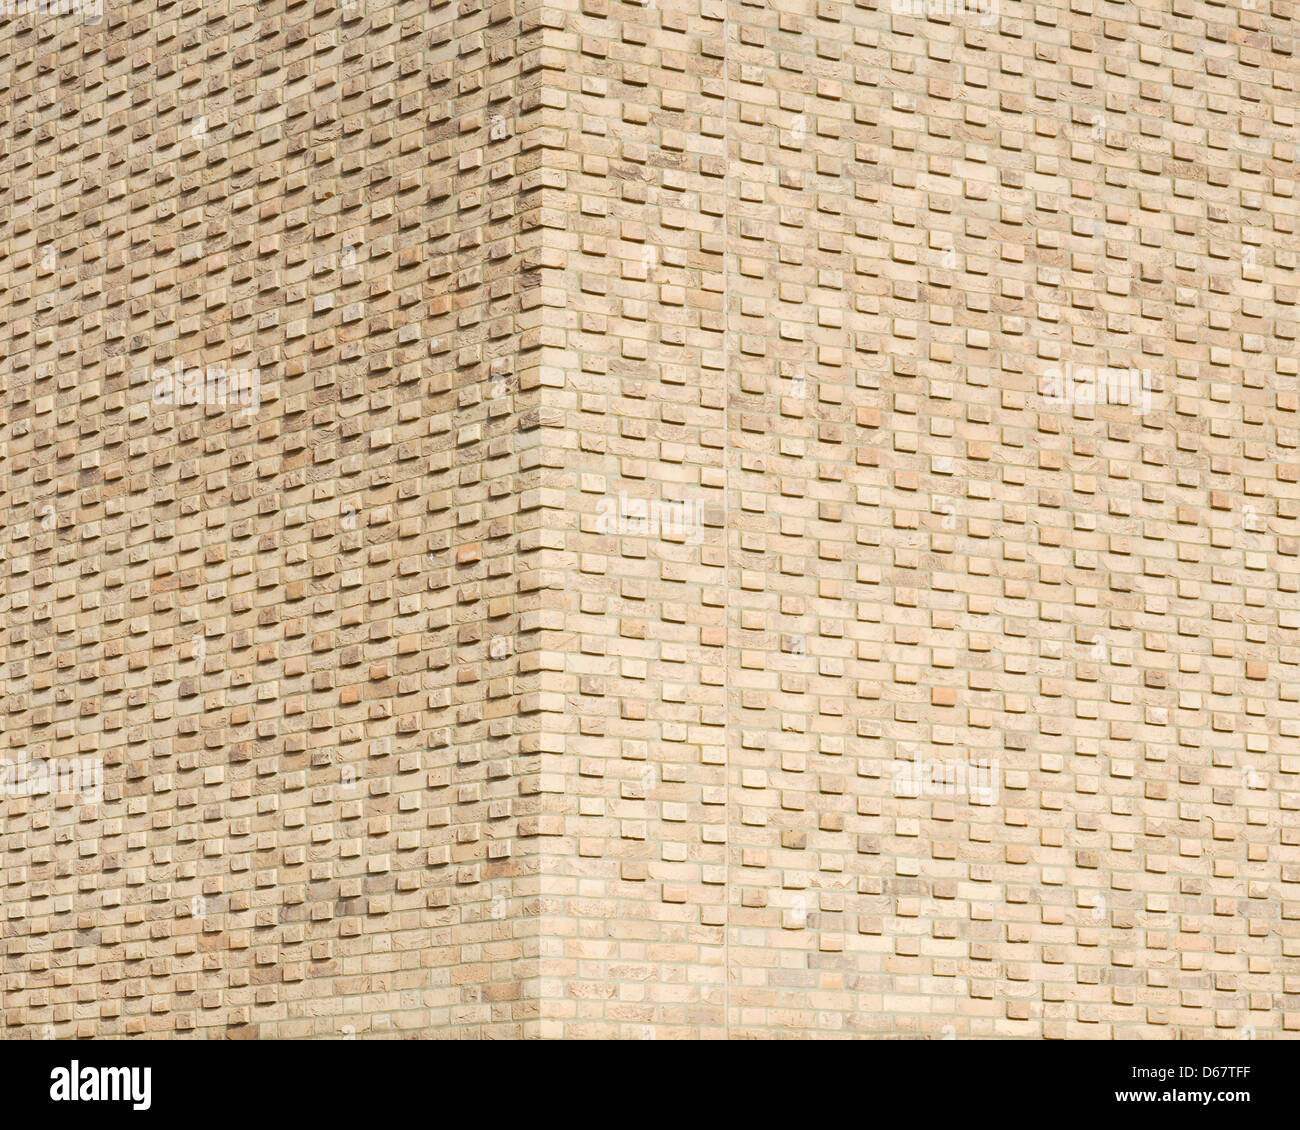 Department of Materials Science and Metallurgy Building, Cambridge, United Kingdom. Architect: NBBJ, 2013. Detail view of brickw Stock Photo